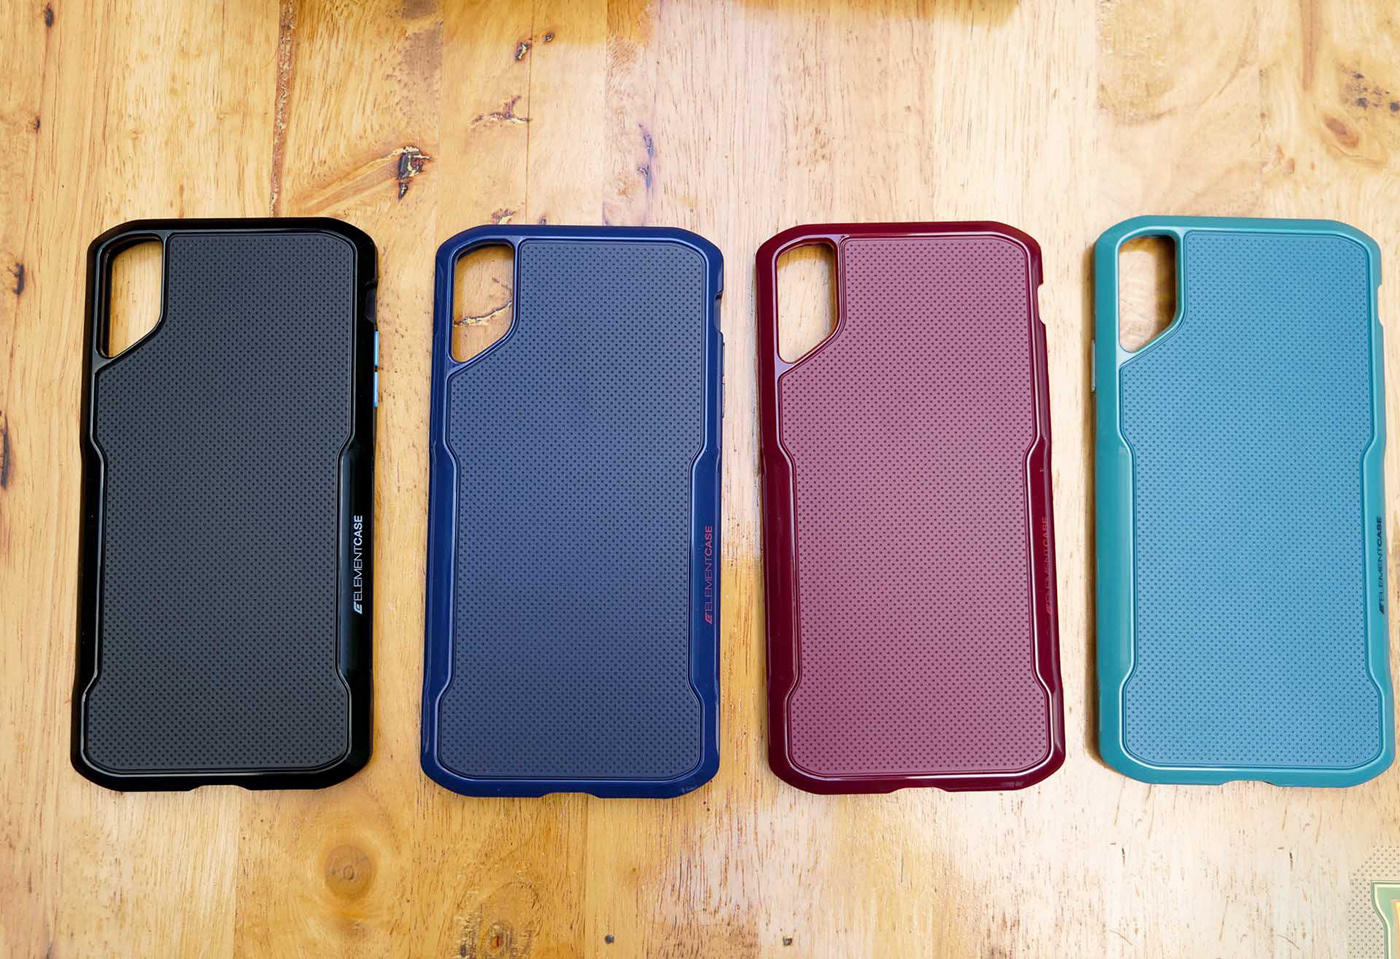 cmf colour material finish industrial design  iphone case product design  trends